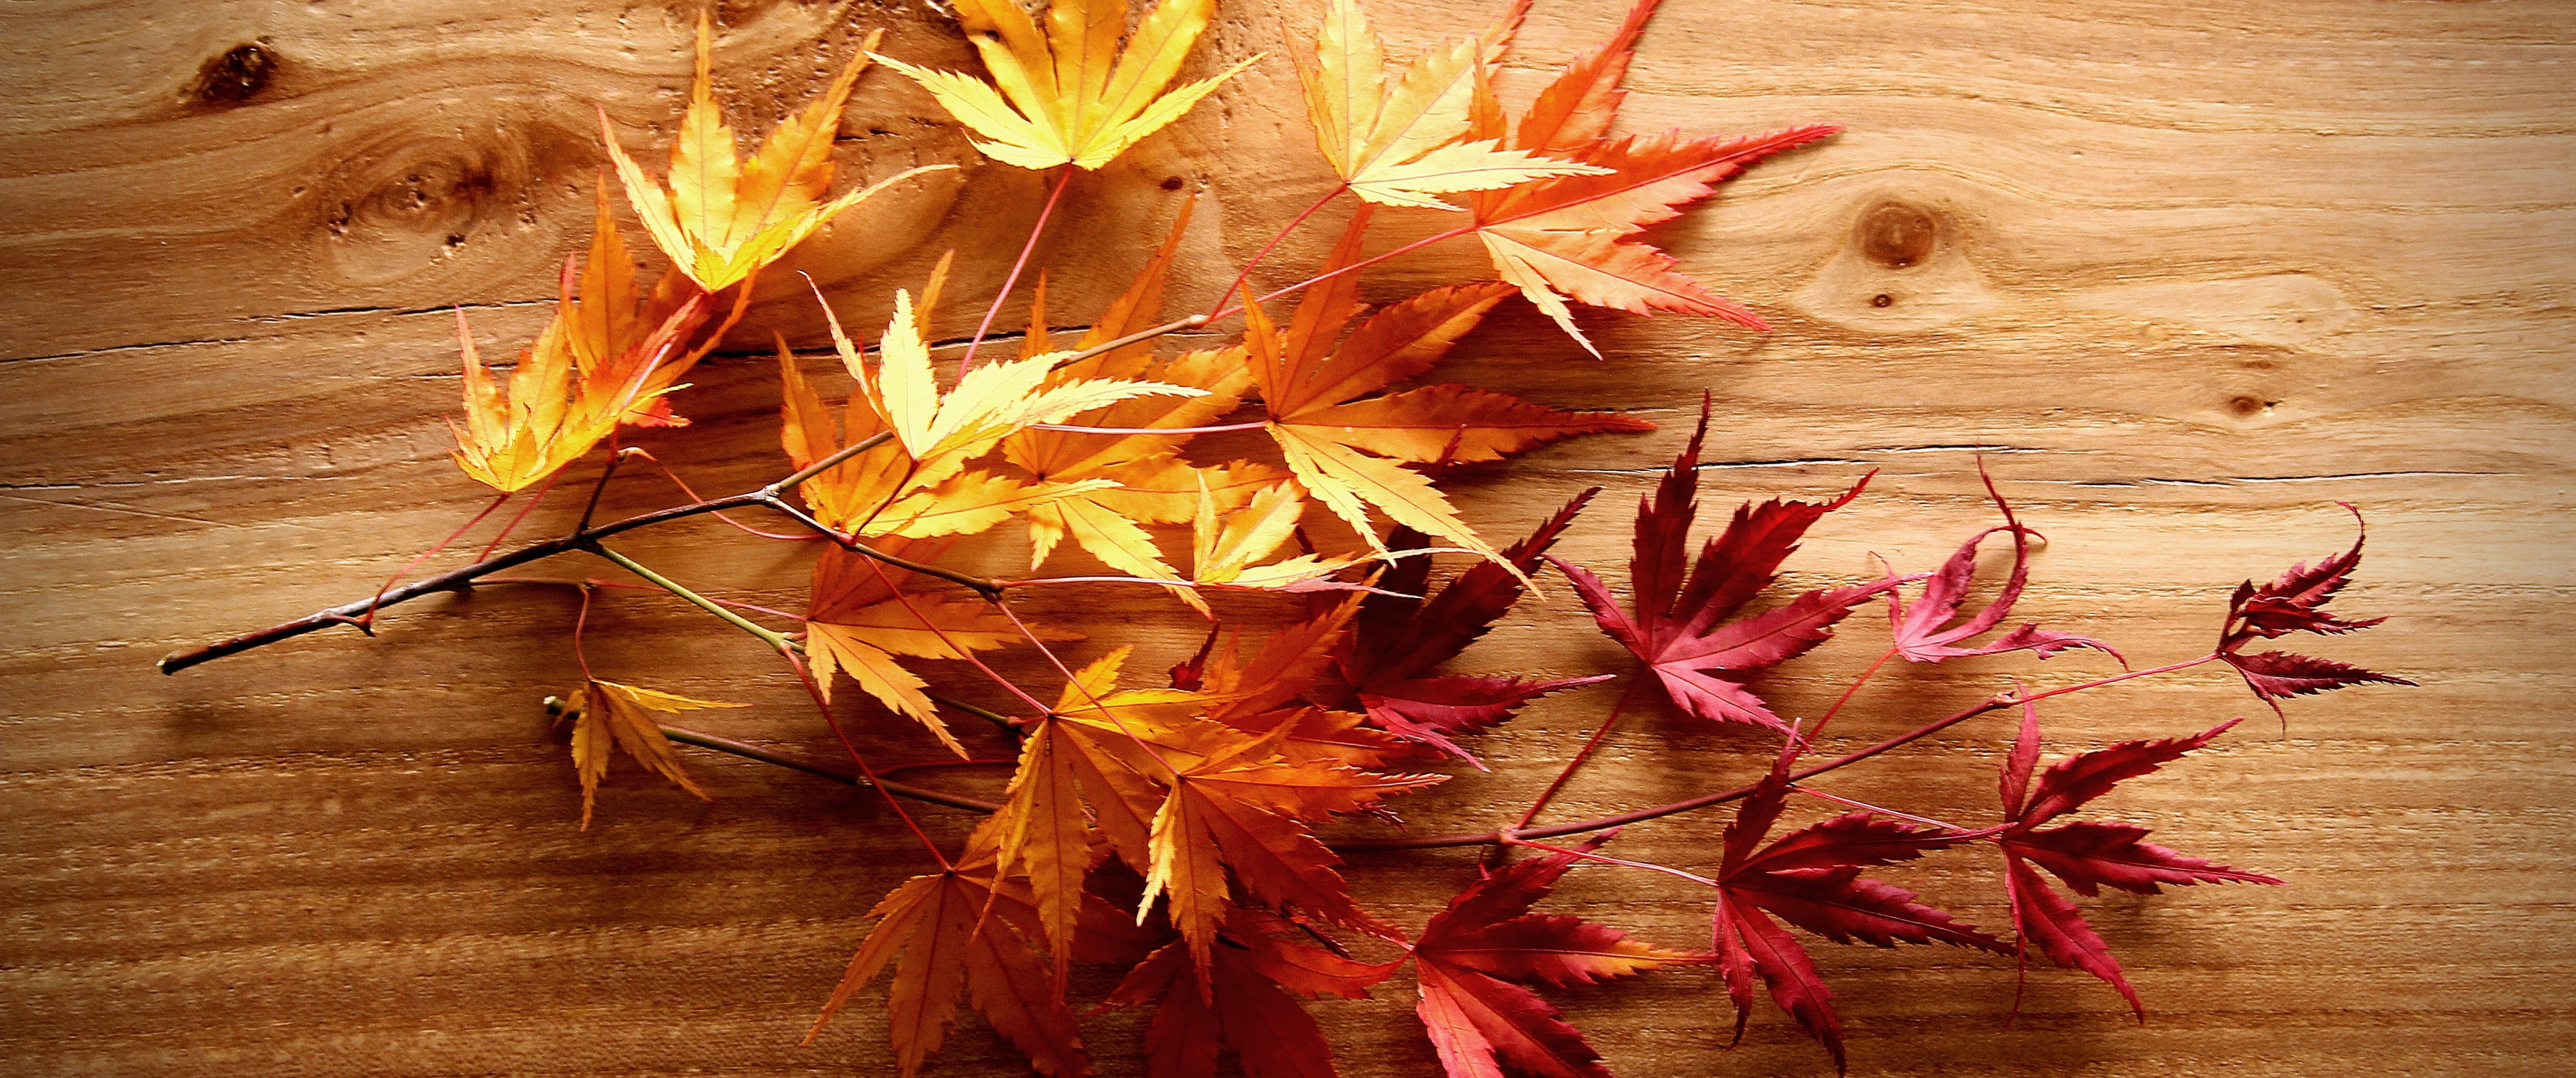 leaves, background, tree, branch, Board, red-yellow